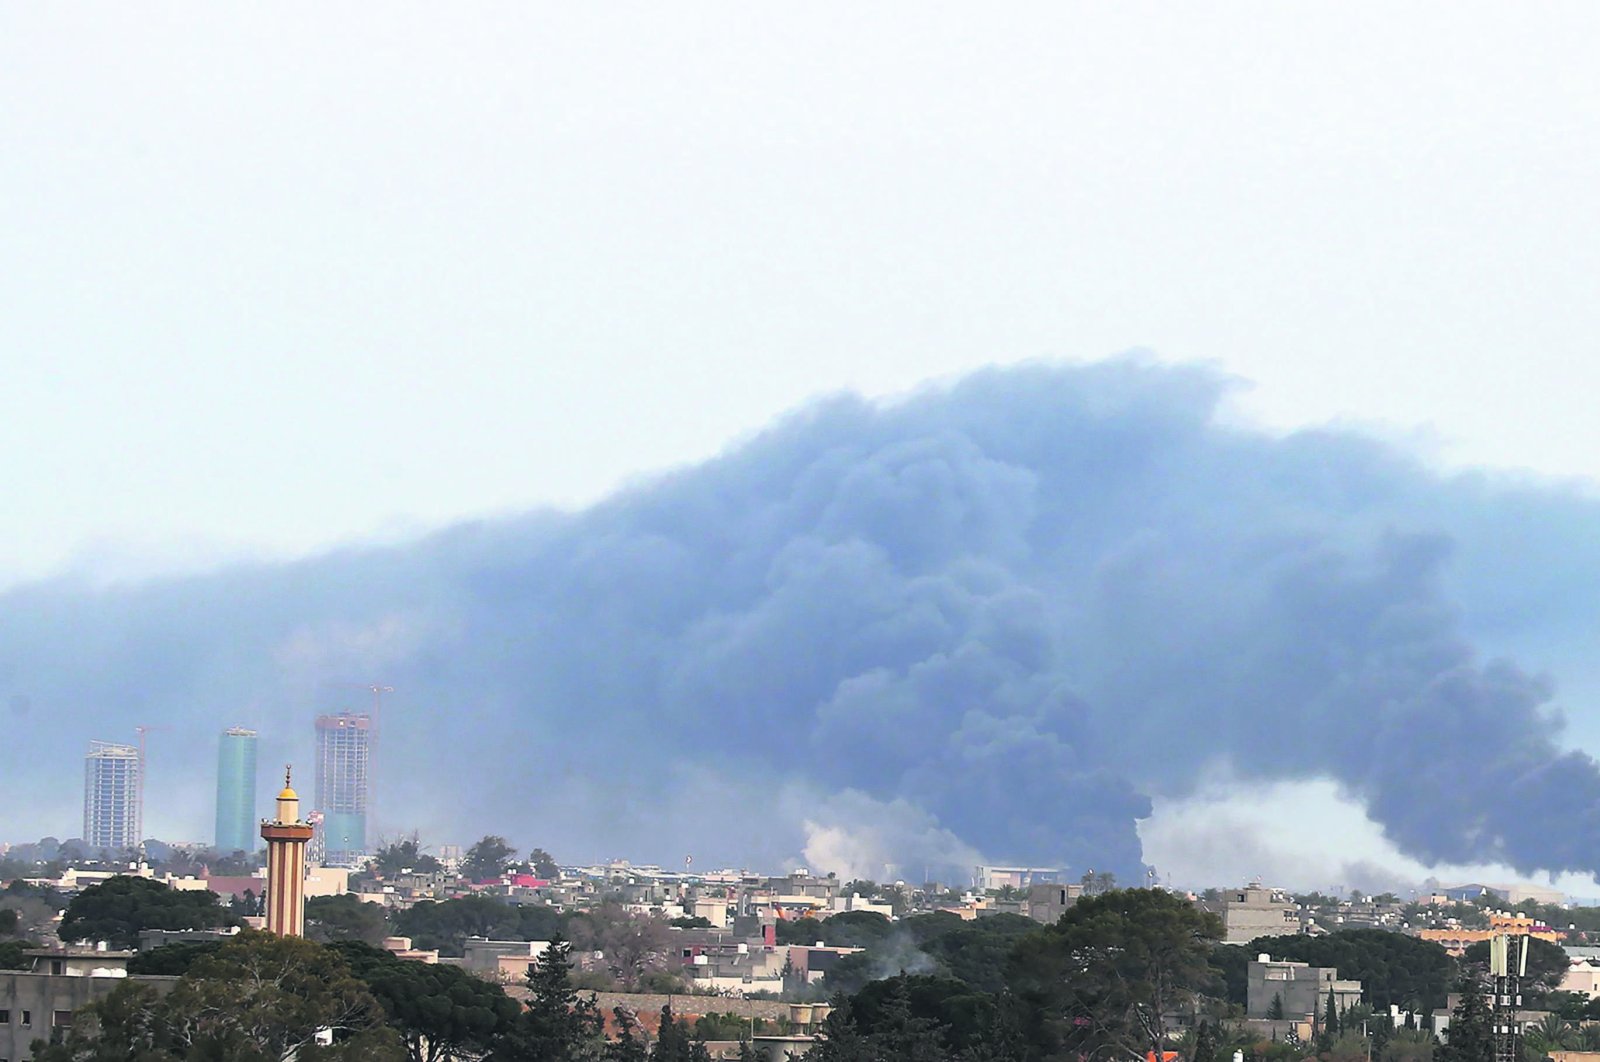 Smoke plumes rise above buildings in the Libyan capital Tripoli, during reported shelling by putschist Gen. Khalifa Haftar's forces, May 9, 2020. (AFP Photo)